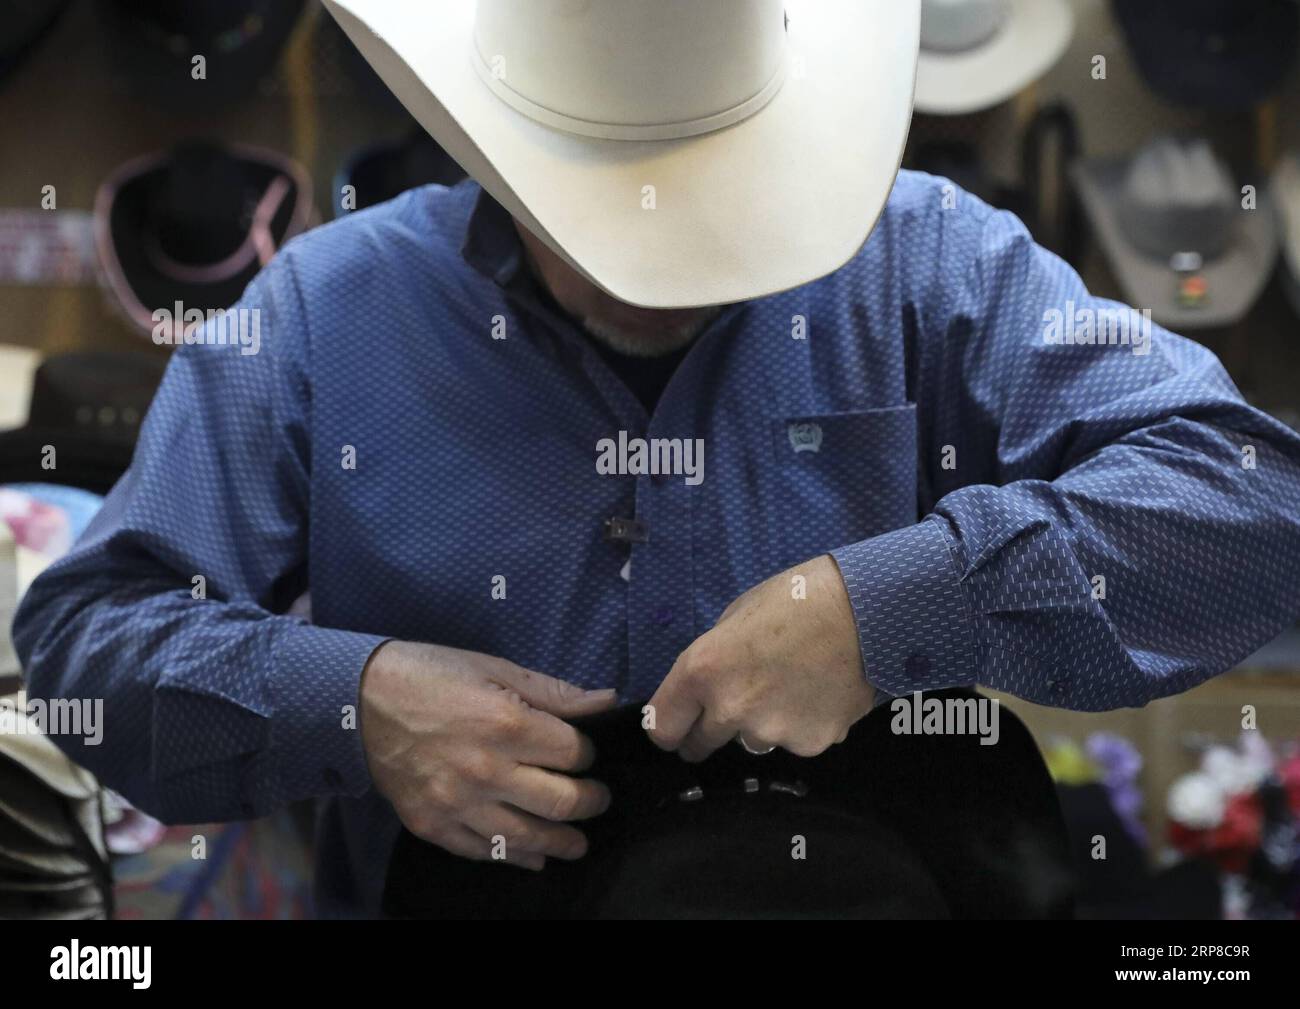 190227) -- HOUSTON, Feb. 27, 2019 (Xinhua) -- CC Enterprises' Clay Newkirk  takes a final look of the cowboy's hat that he shapes before handing it to  a customer in Houston, Texas